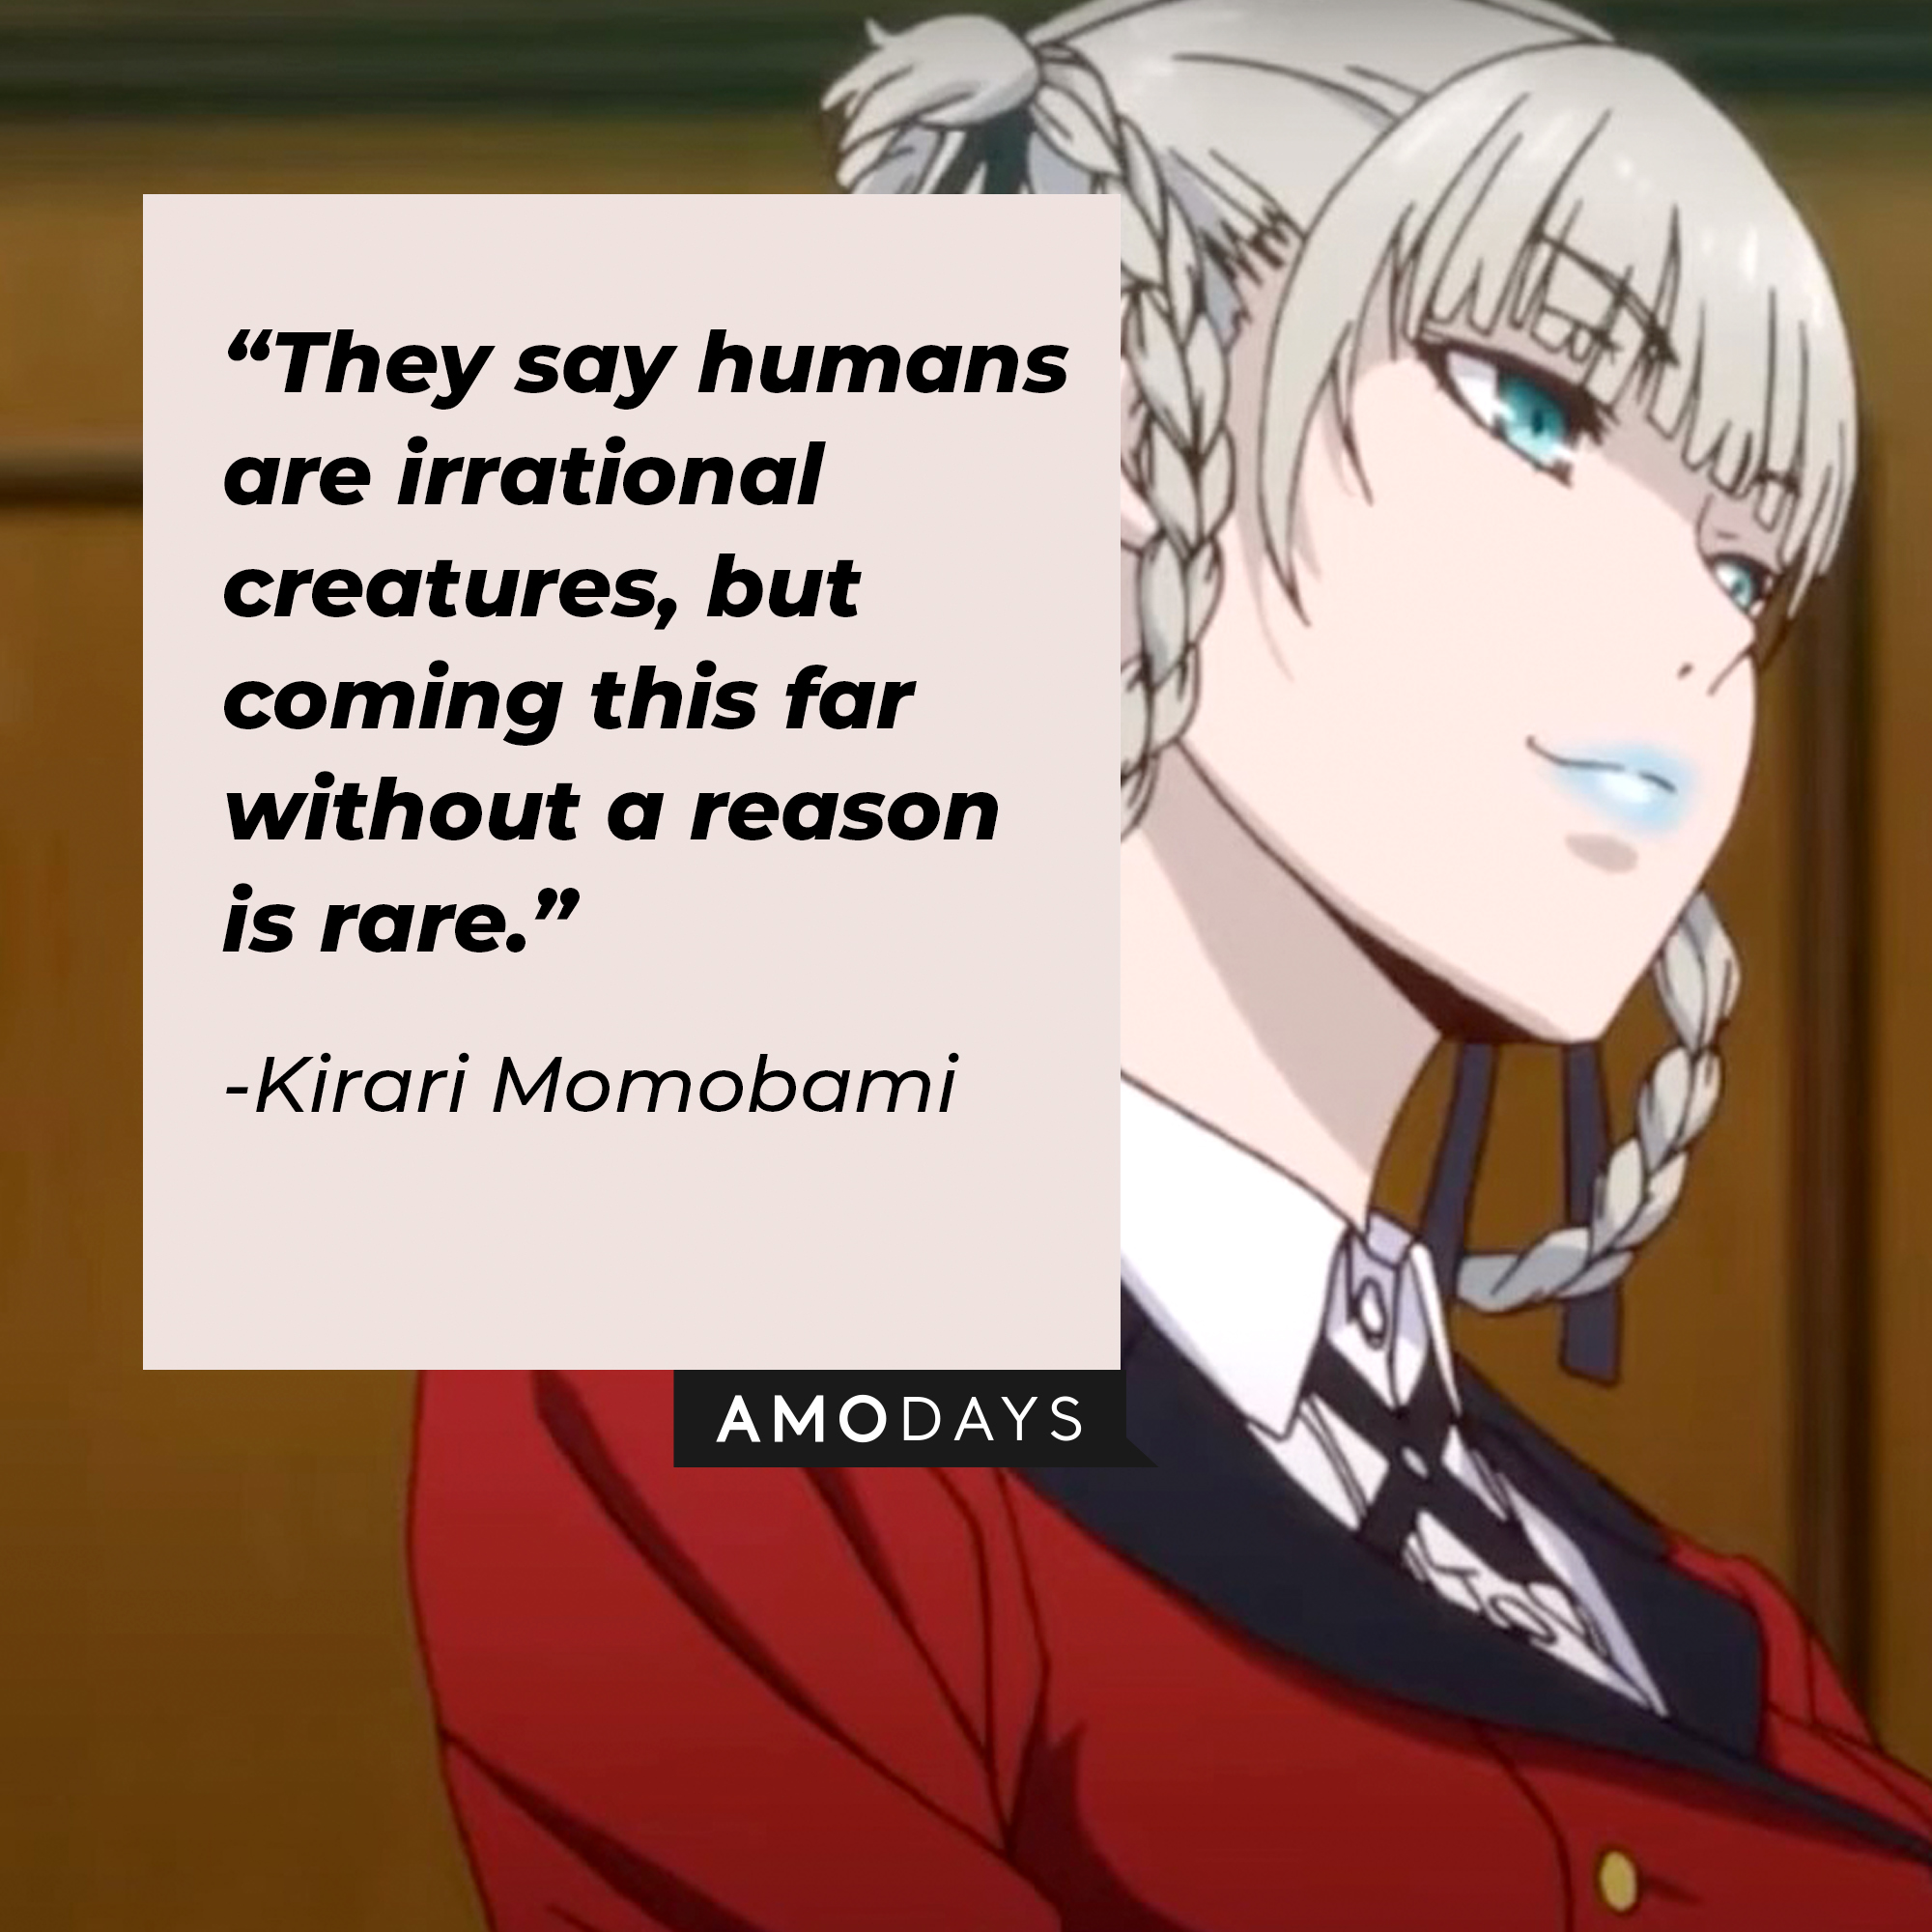 A picture of Kirari Momobami with her quote: “They say humans are irrational creatures, but coming this far without a reason is rare.” | Source: youtube.com/netflixanime